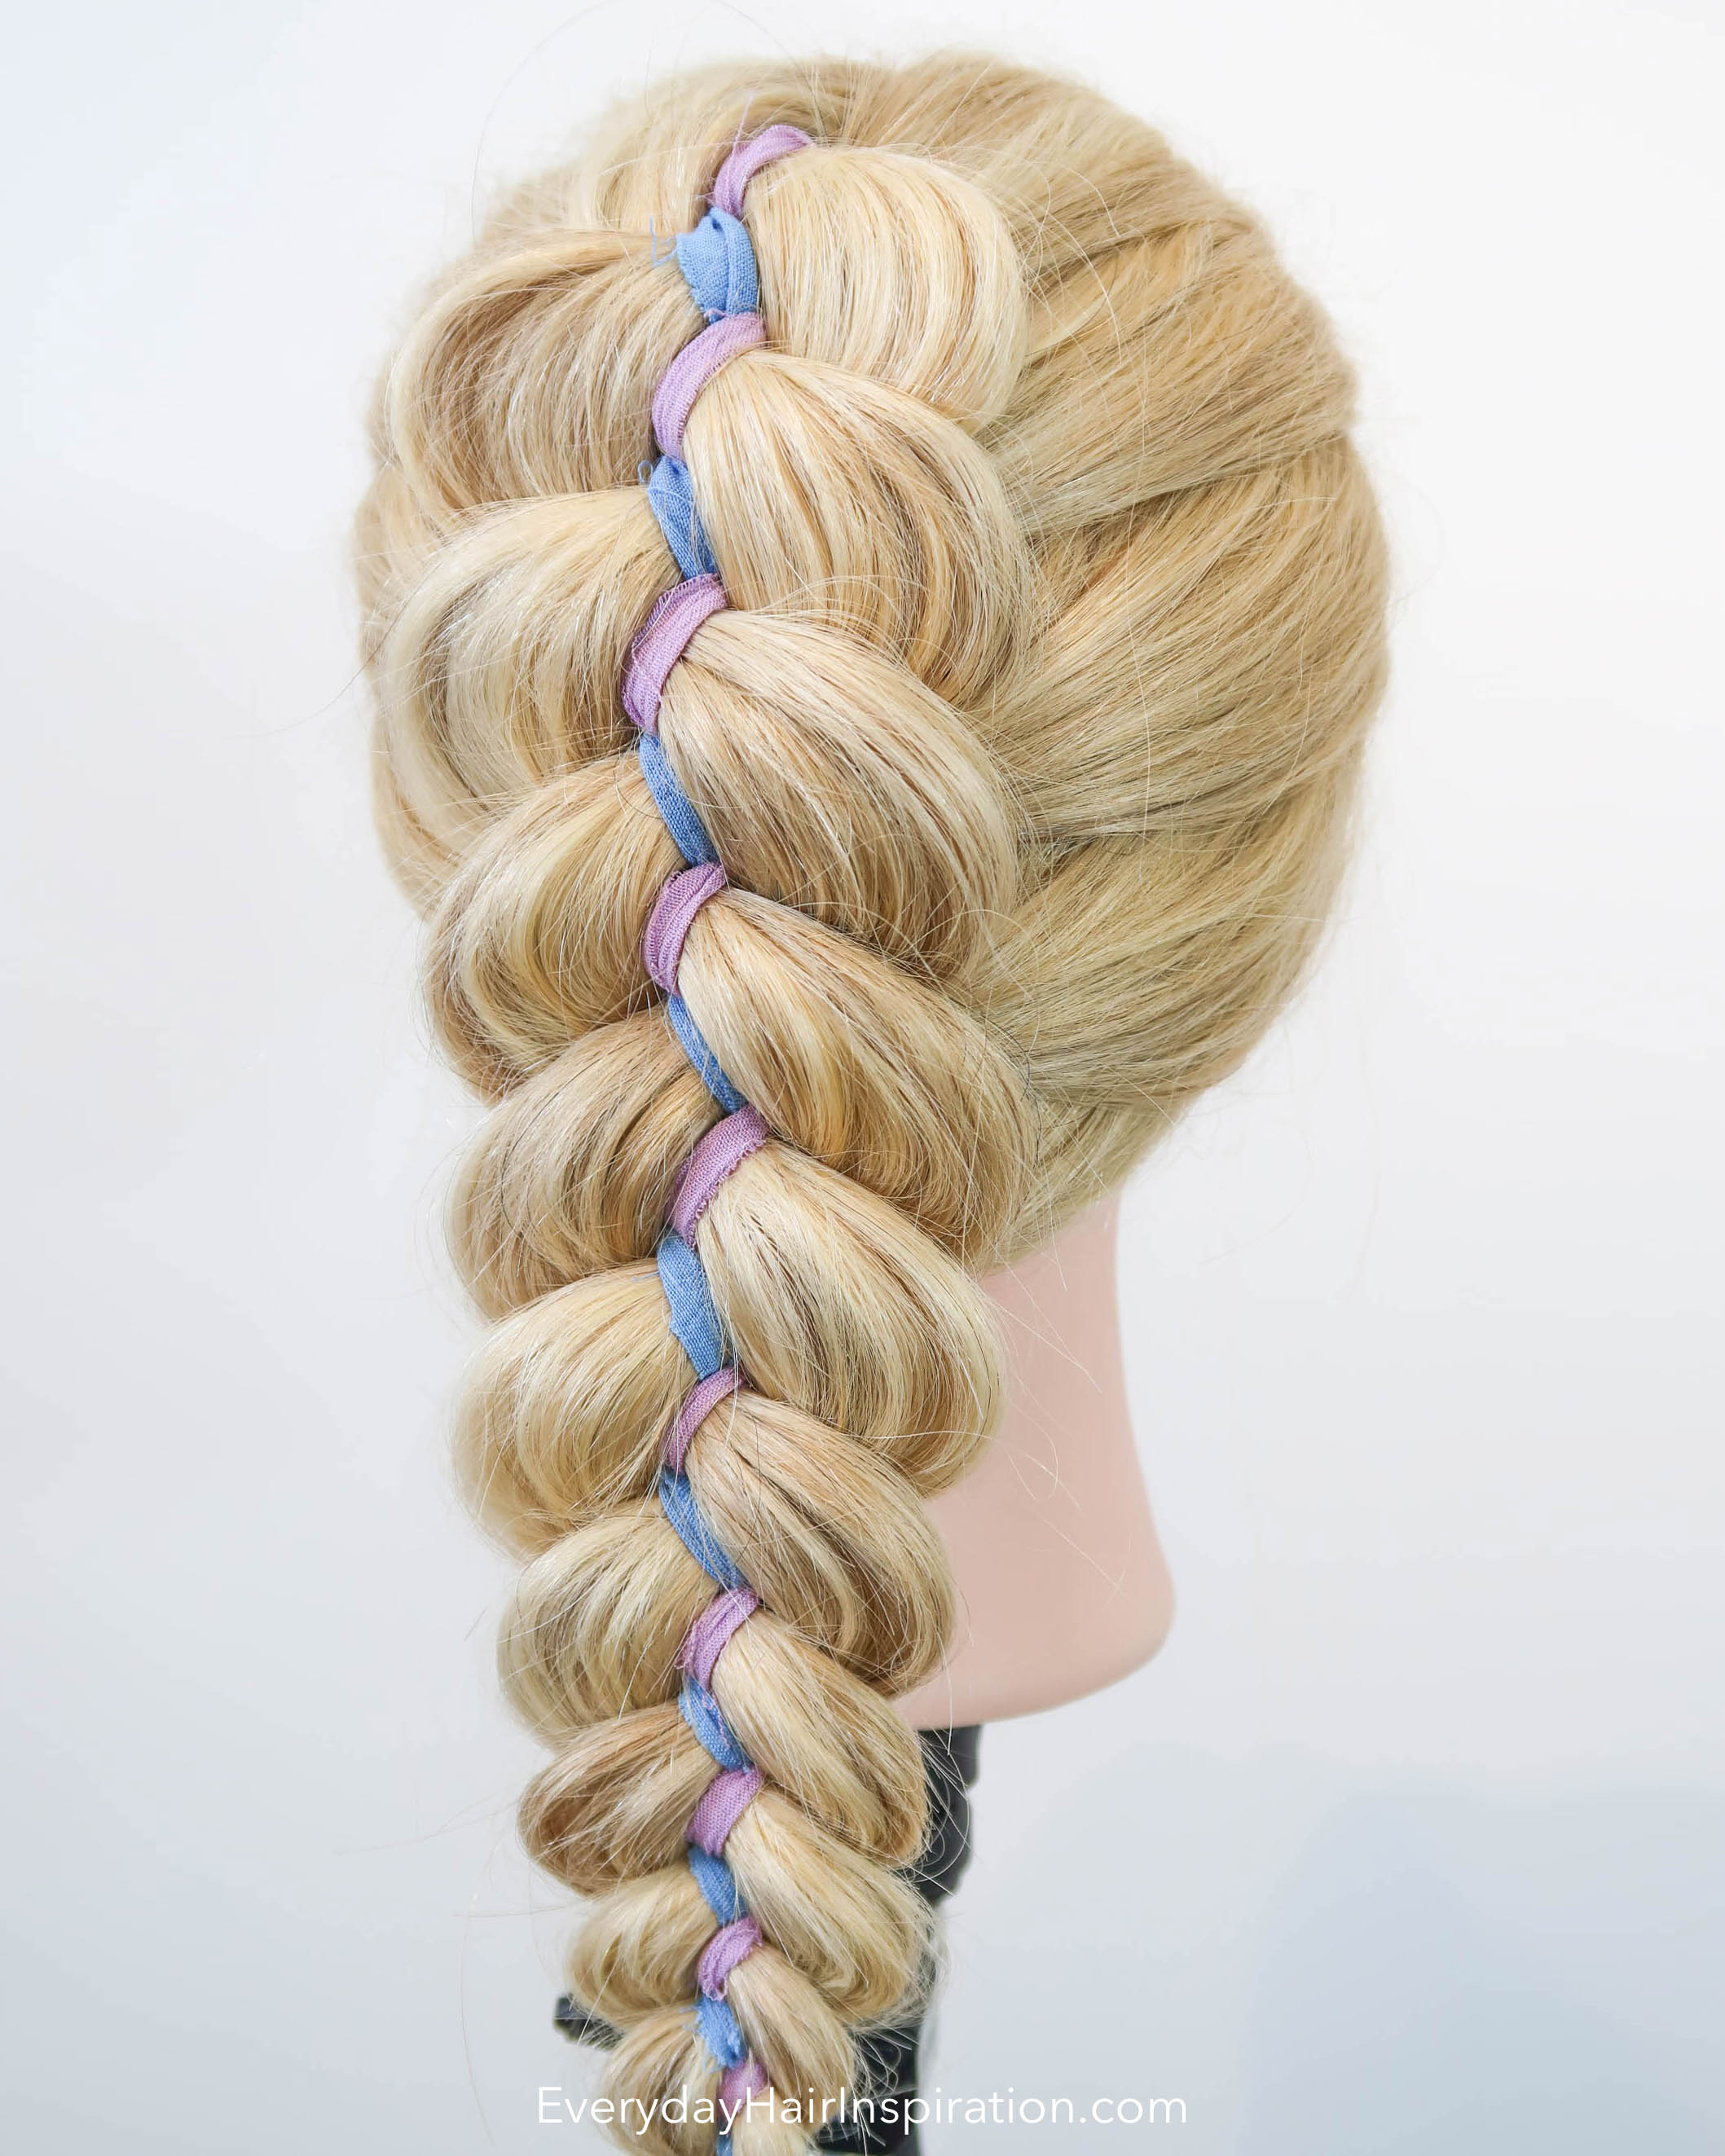 How to DIY Cute Braided Bun with Ribbon Hairstyle